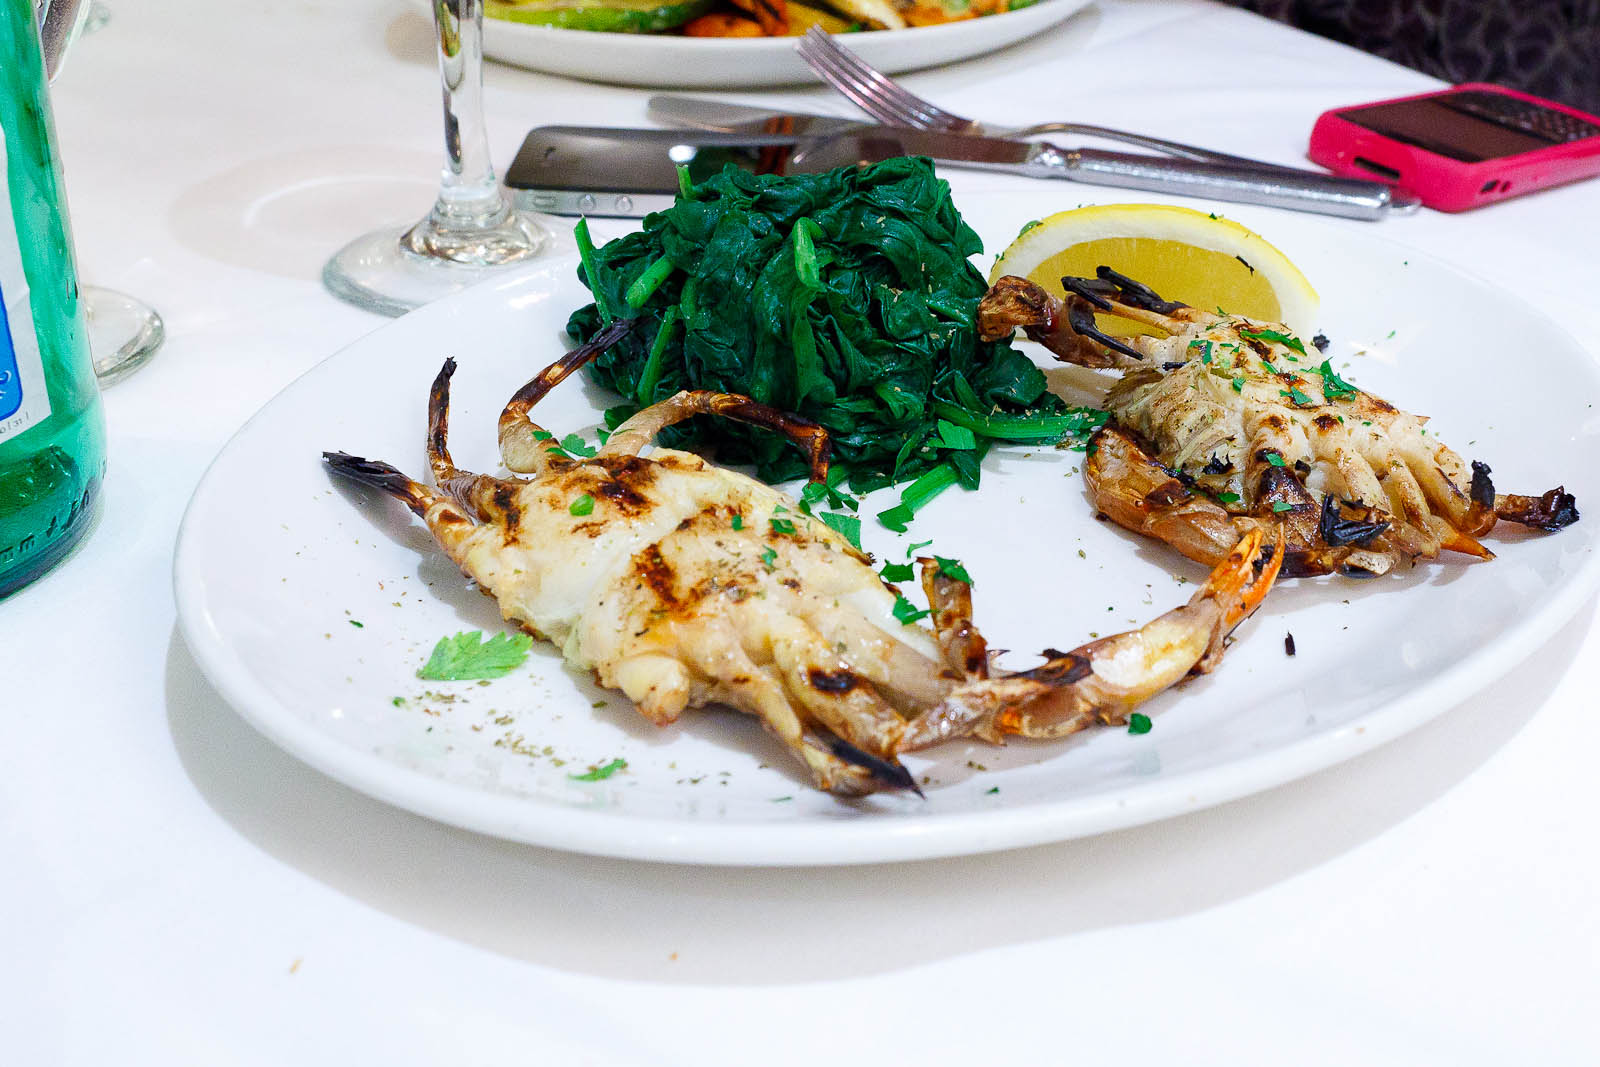 Grilled soft shell crab with steamed spinach